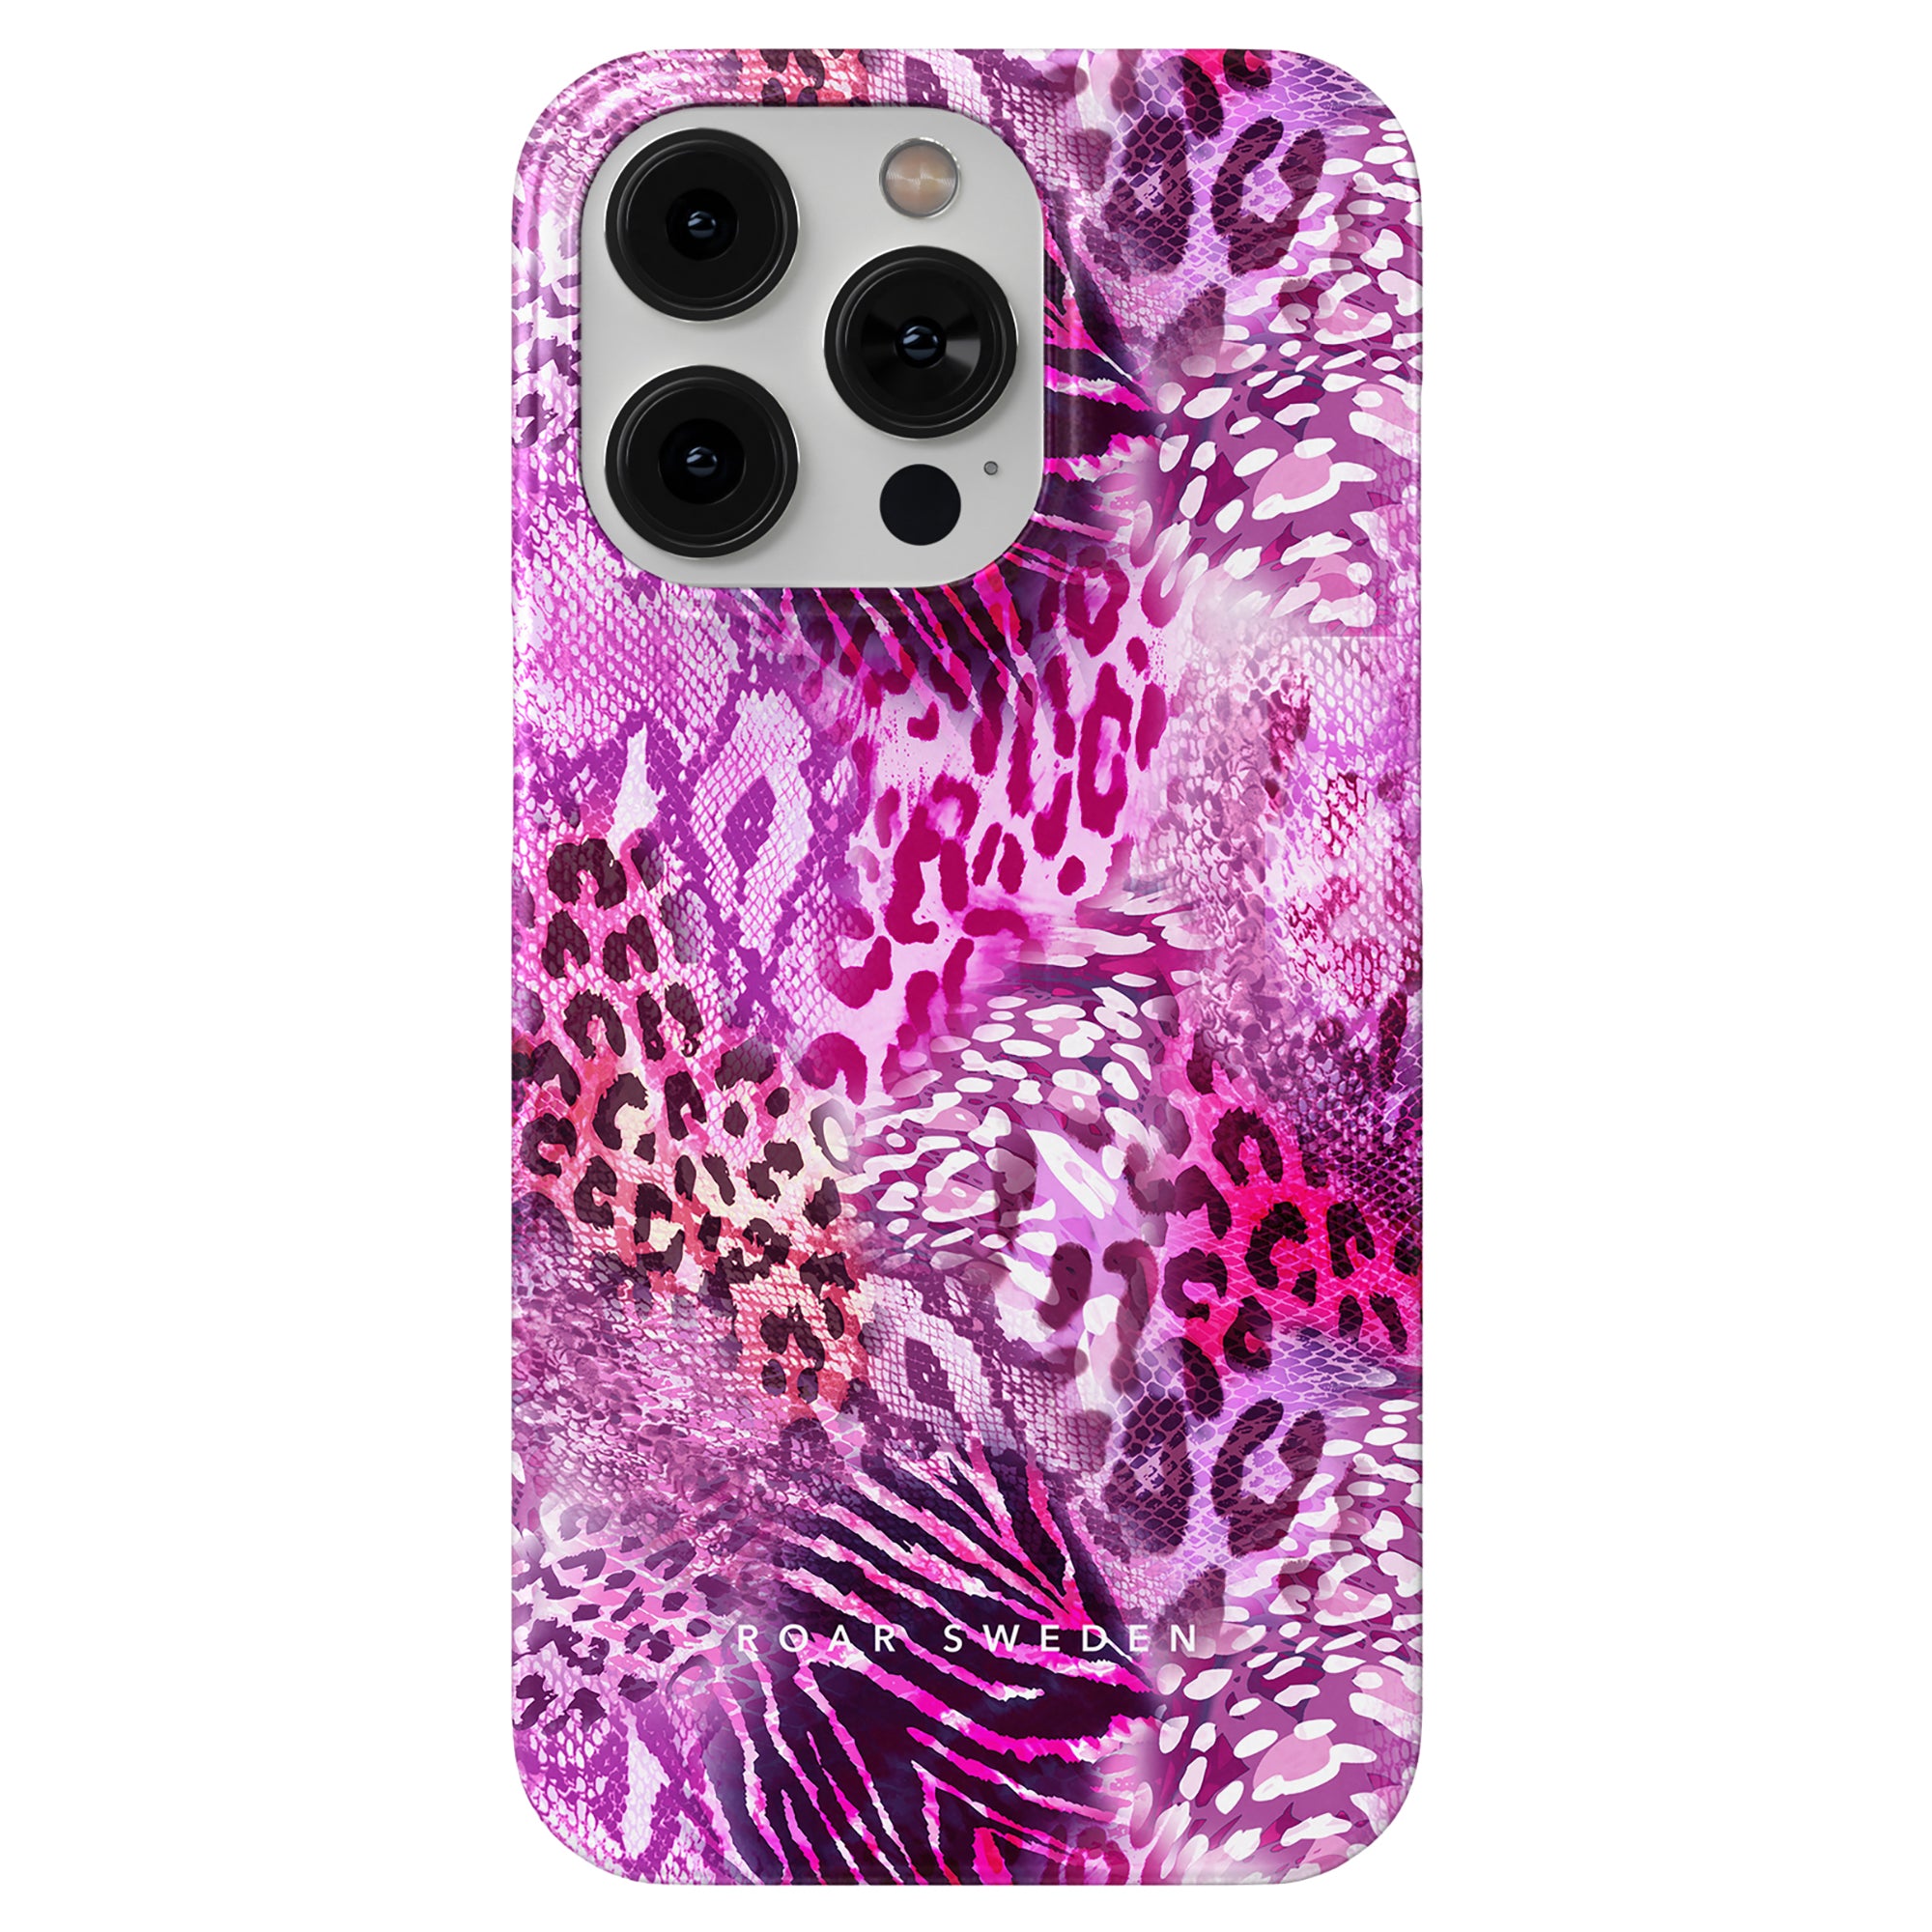 A pink and purple Swirl Leopard - Slim case for the iPhone 11.